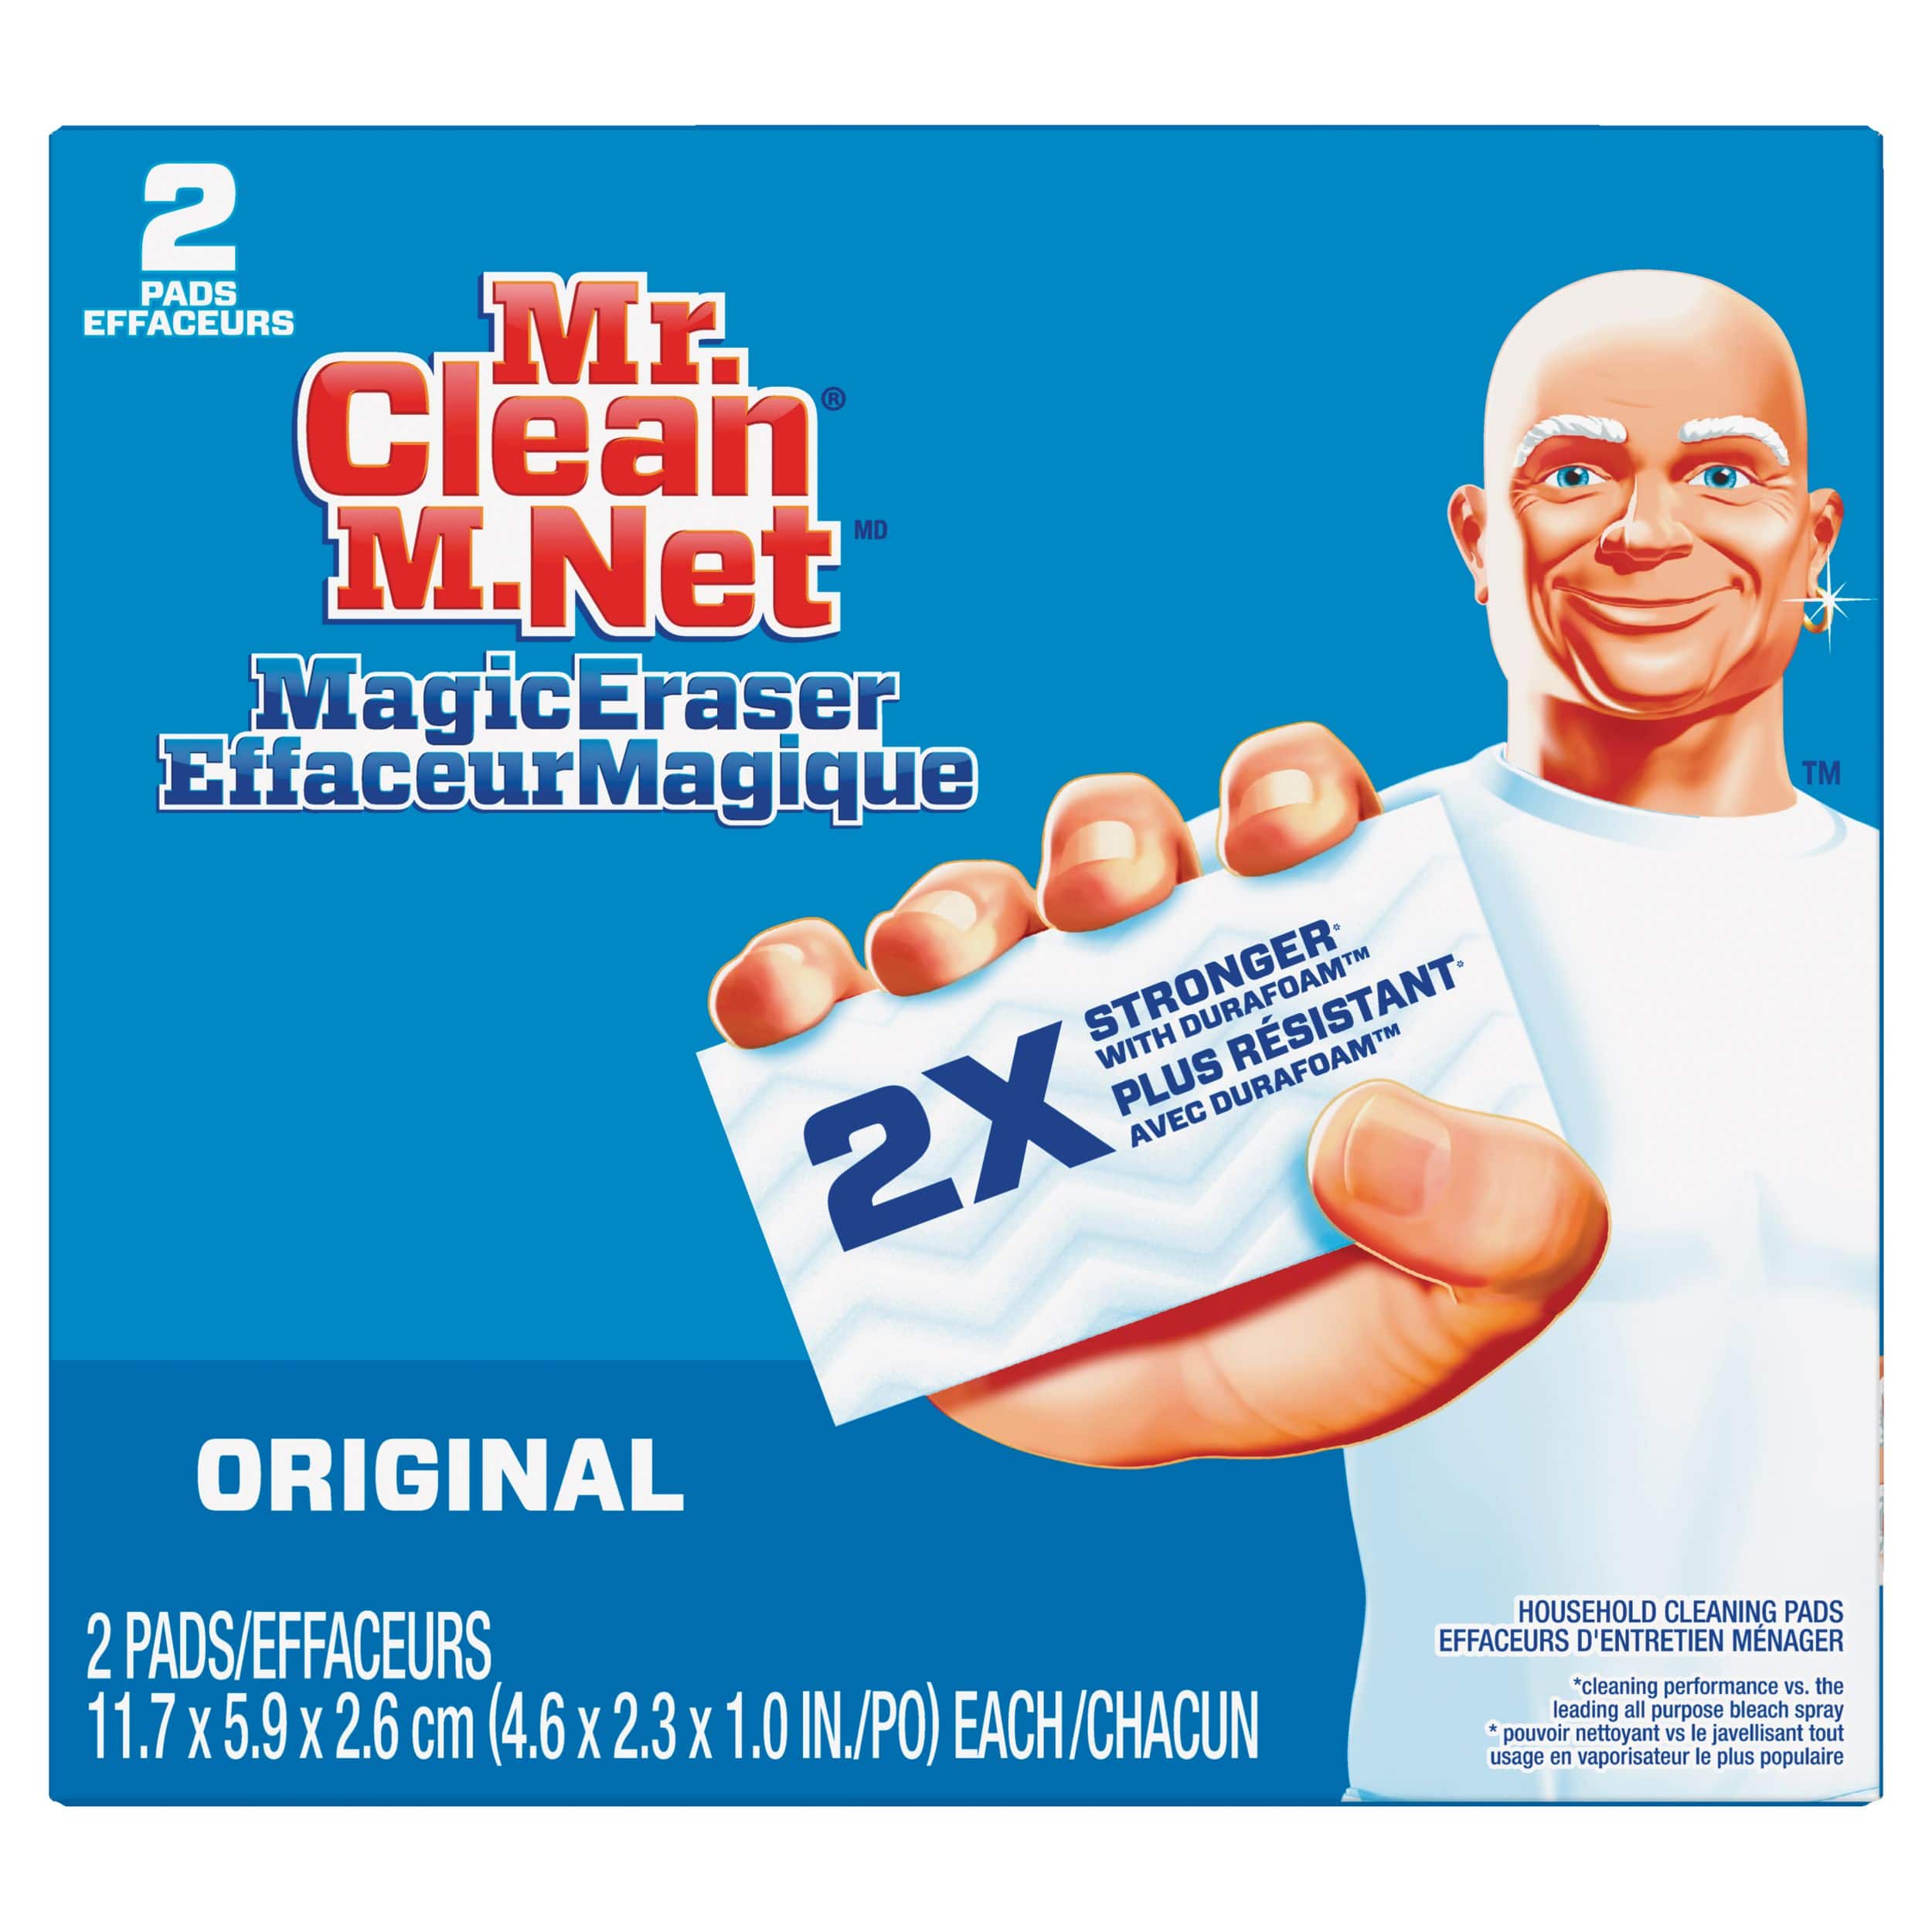  7 x 10 Cleaning Wipe with Miracle Magic